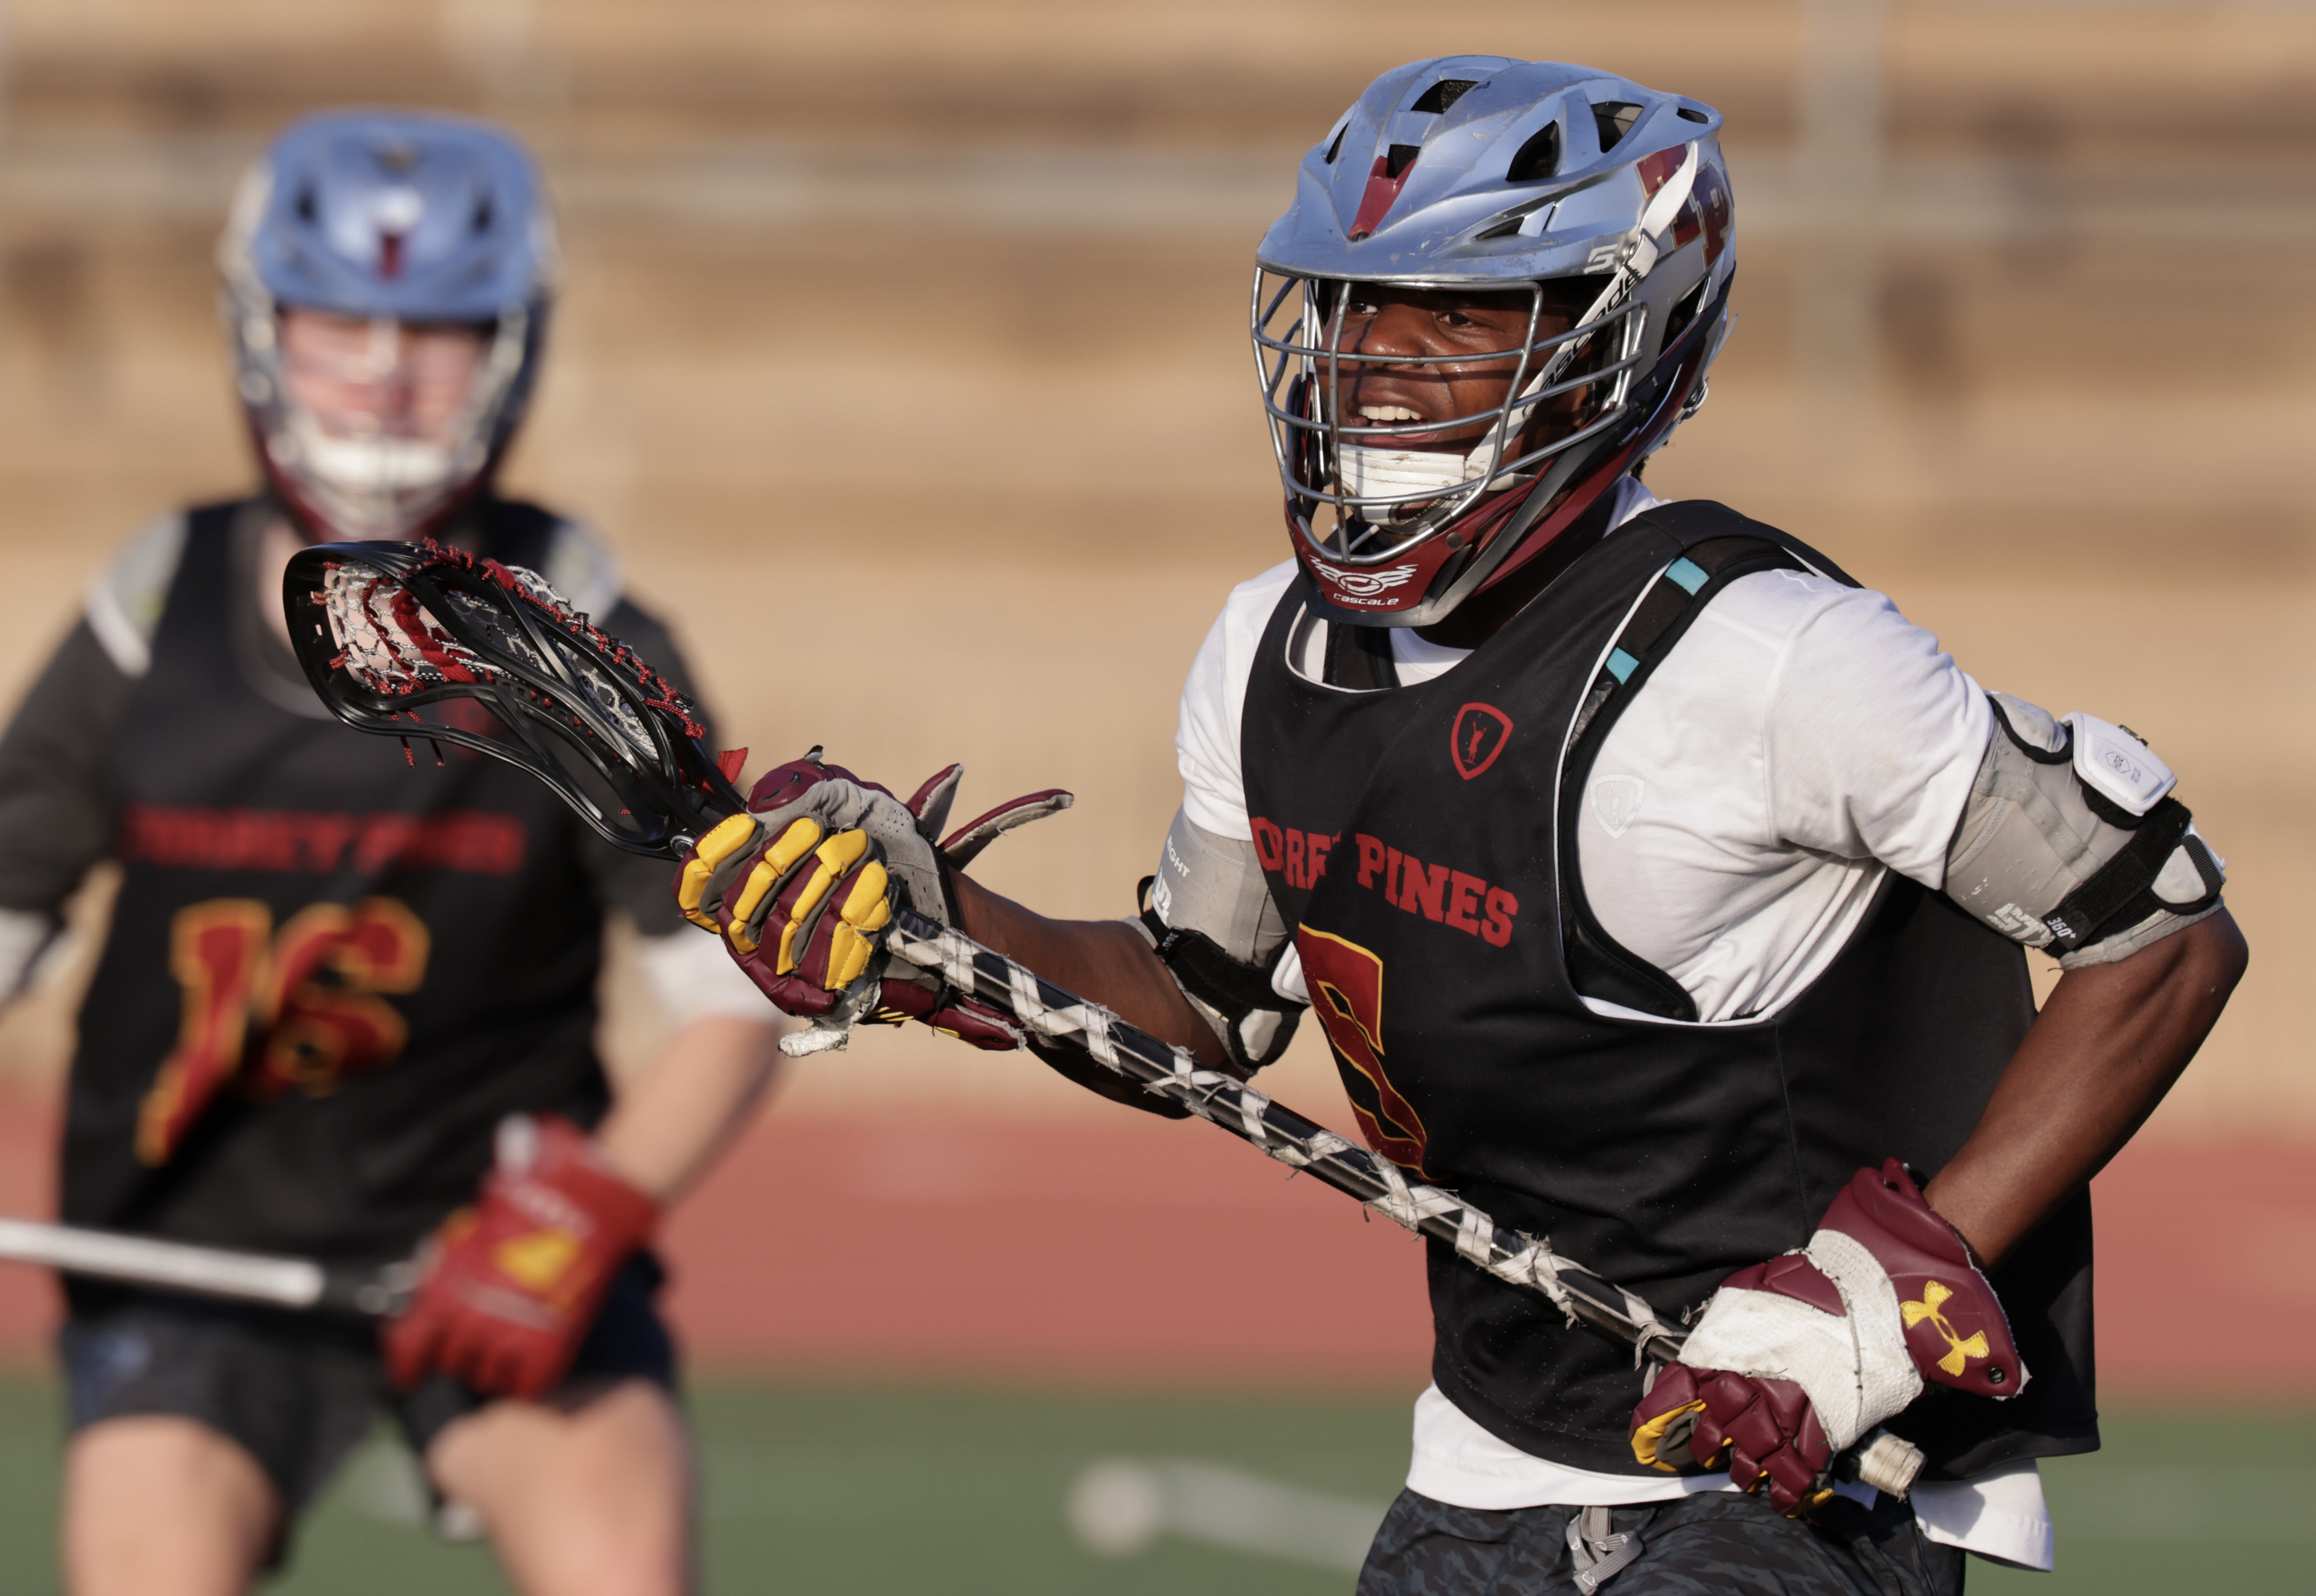 'Timing, luck and miracles' brought Torrey Pines lacrosse star SJ Dohrenwend to San Diego